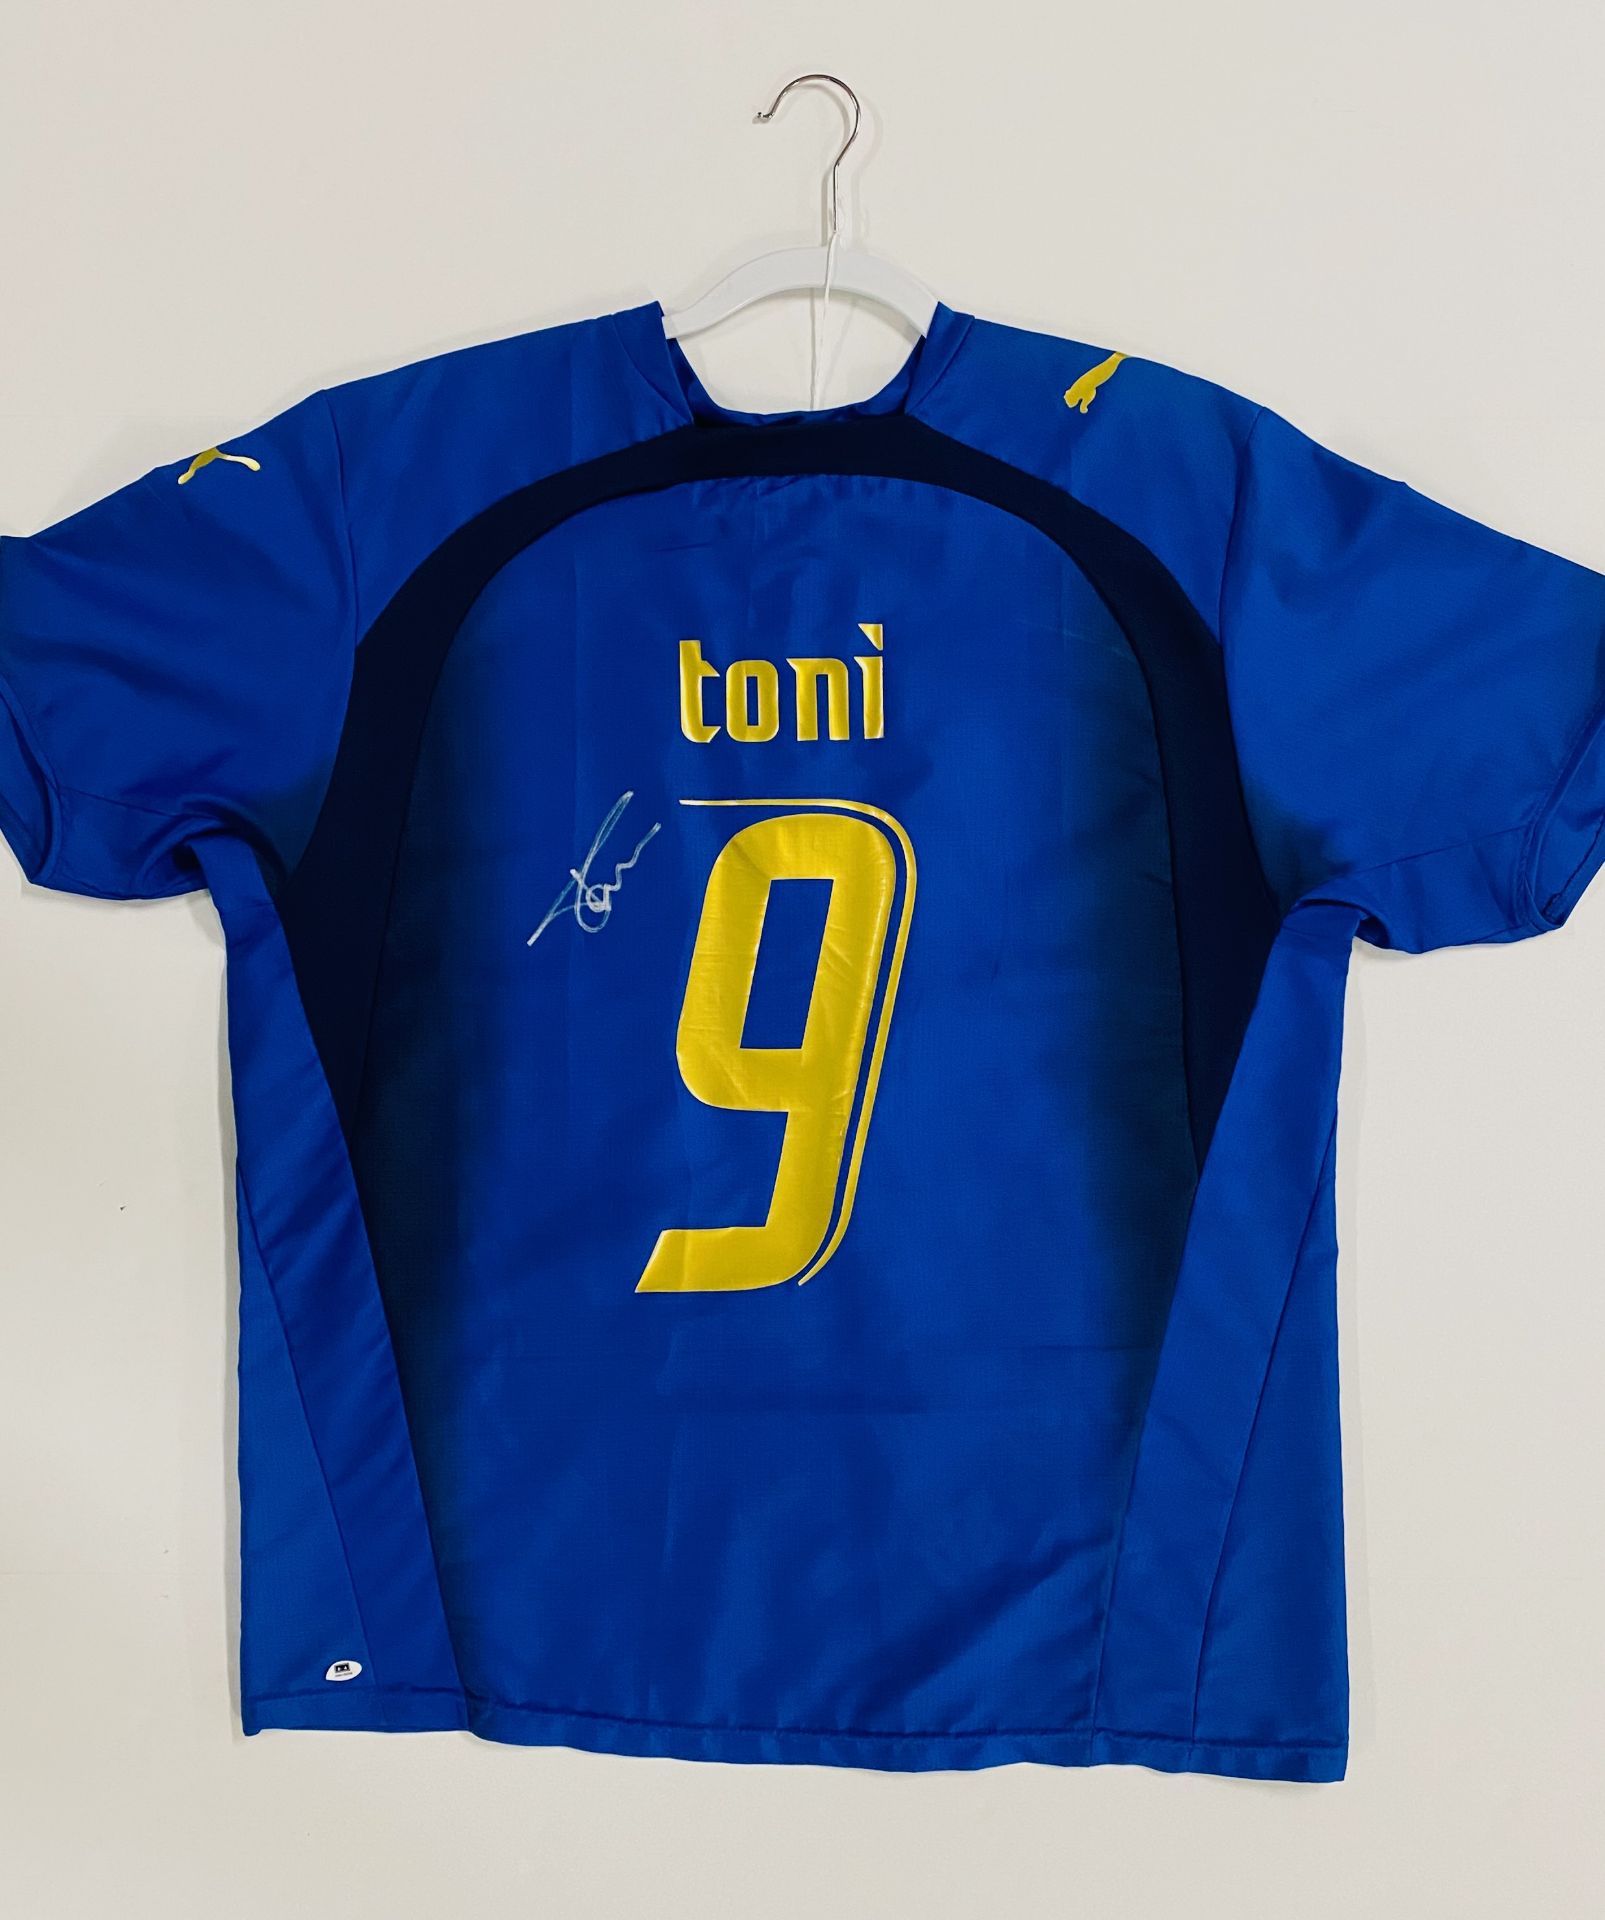 Italy 2006 World Cup champions signed jersey - Image 2 of 2